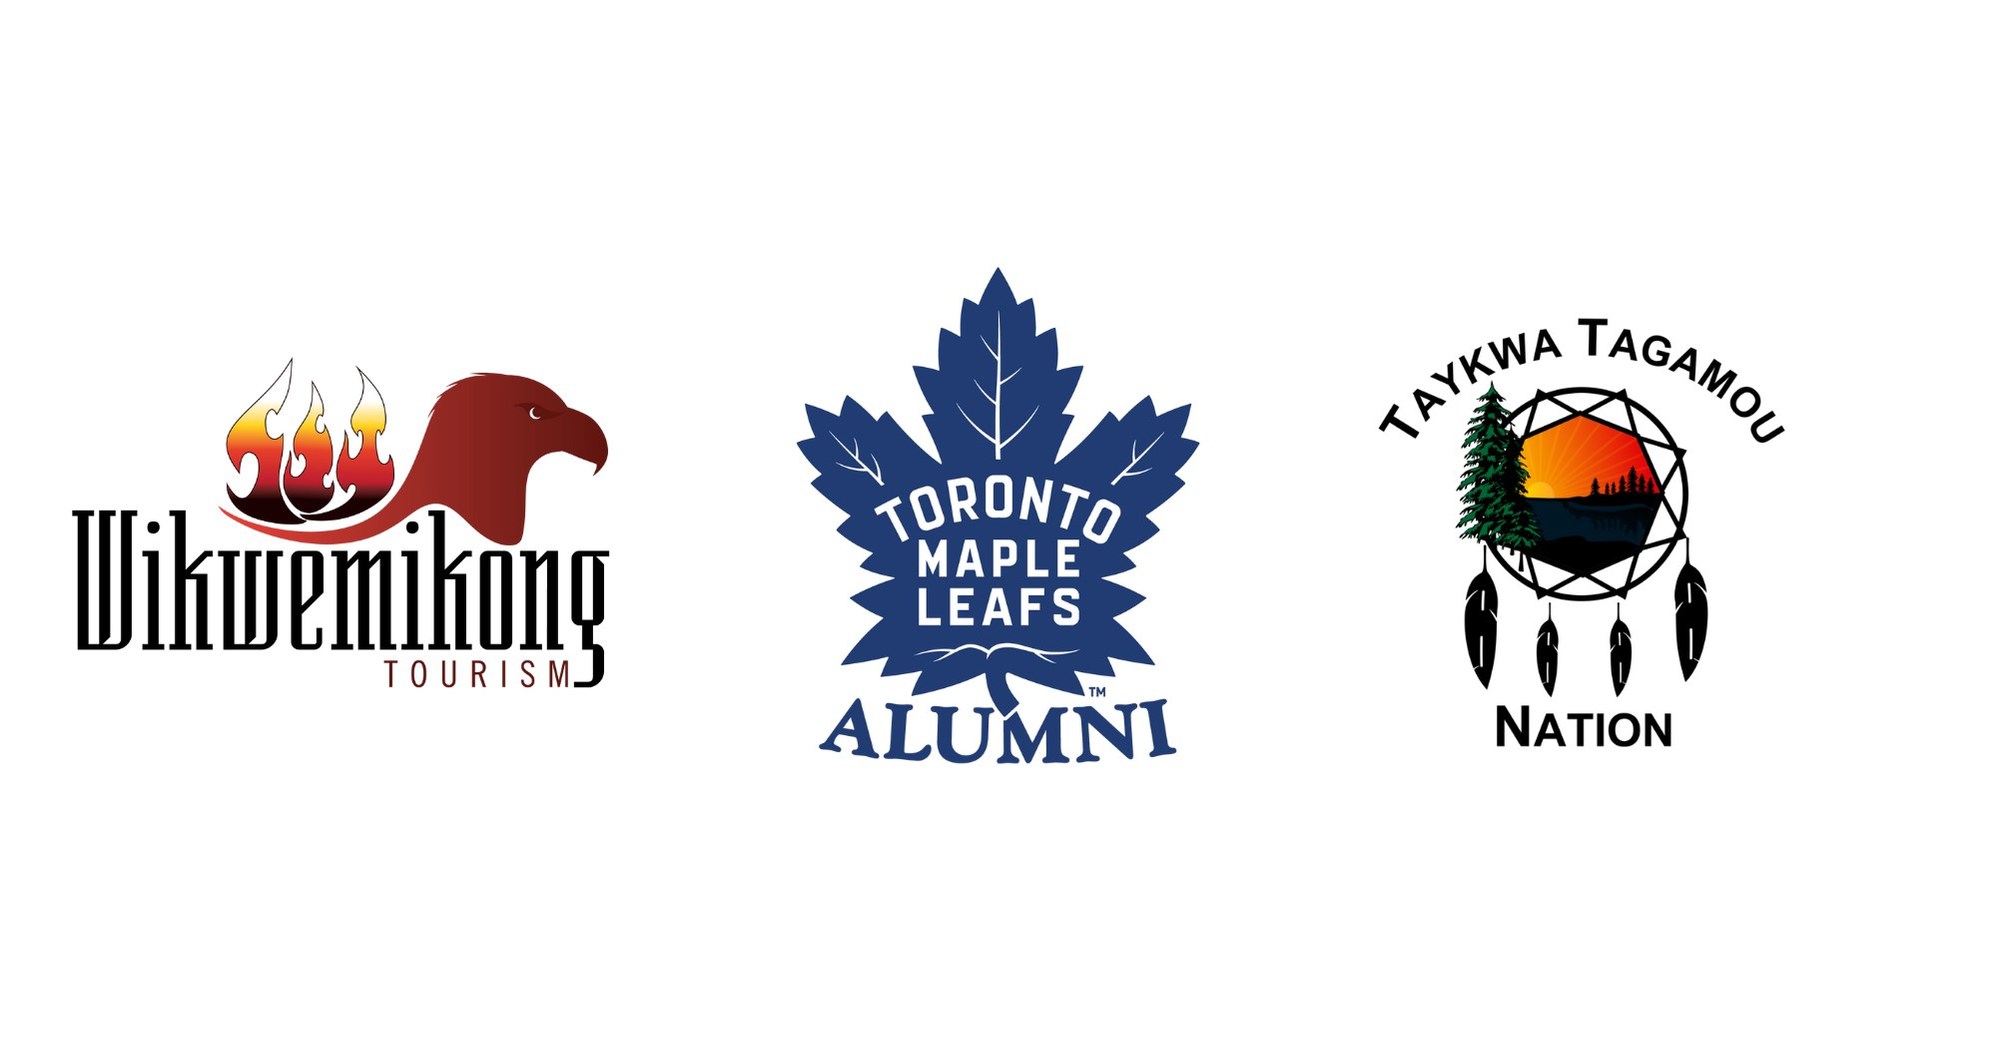 Toronto Maple Leafs - The Maple Leafs acknowledge the importance